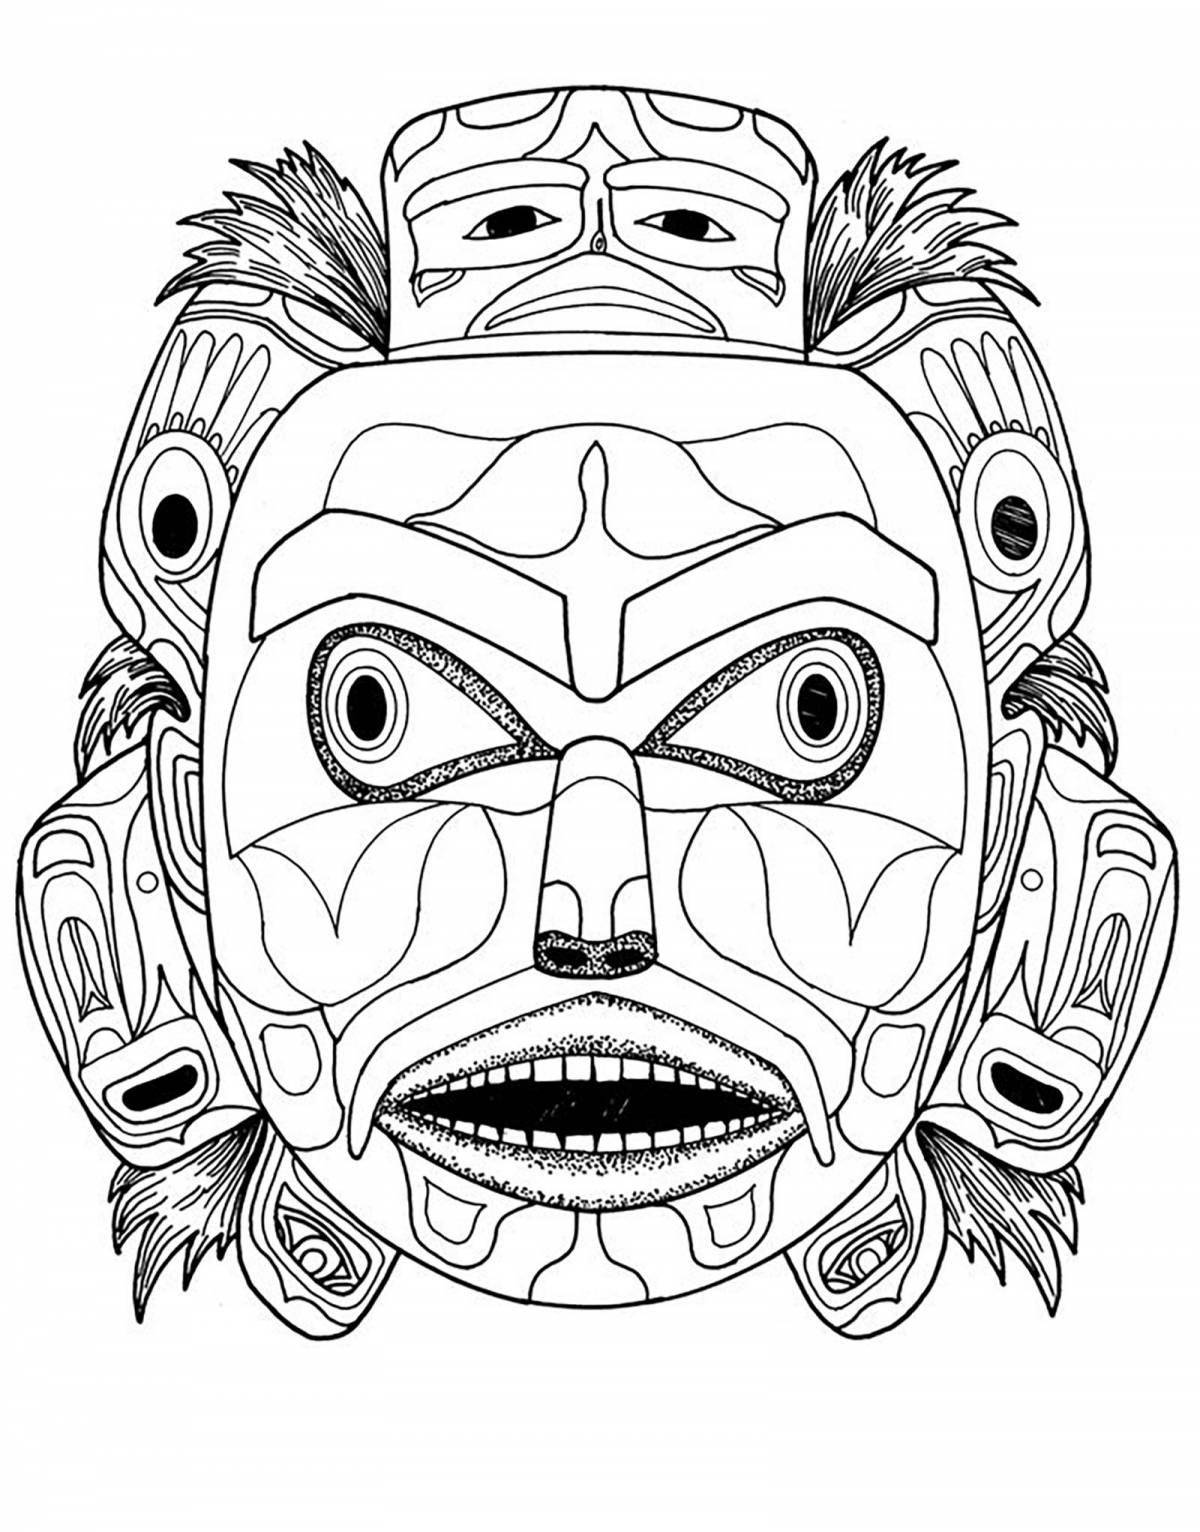 Detailed robot mask coloring page